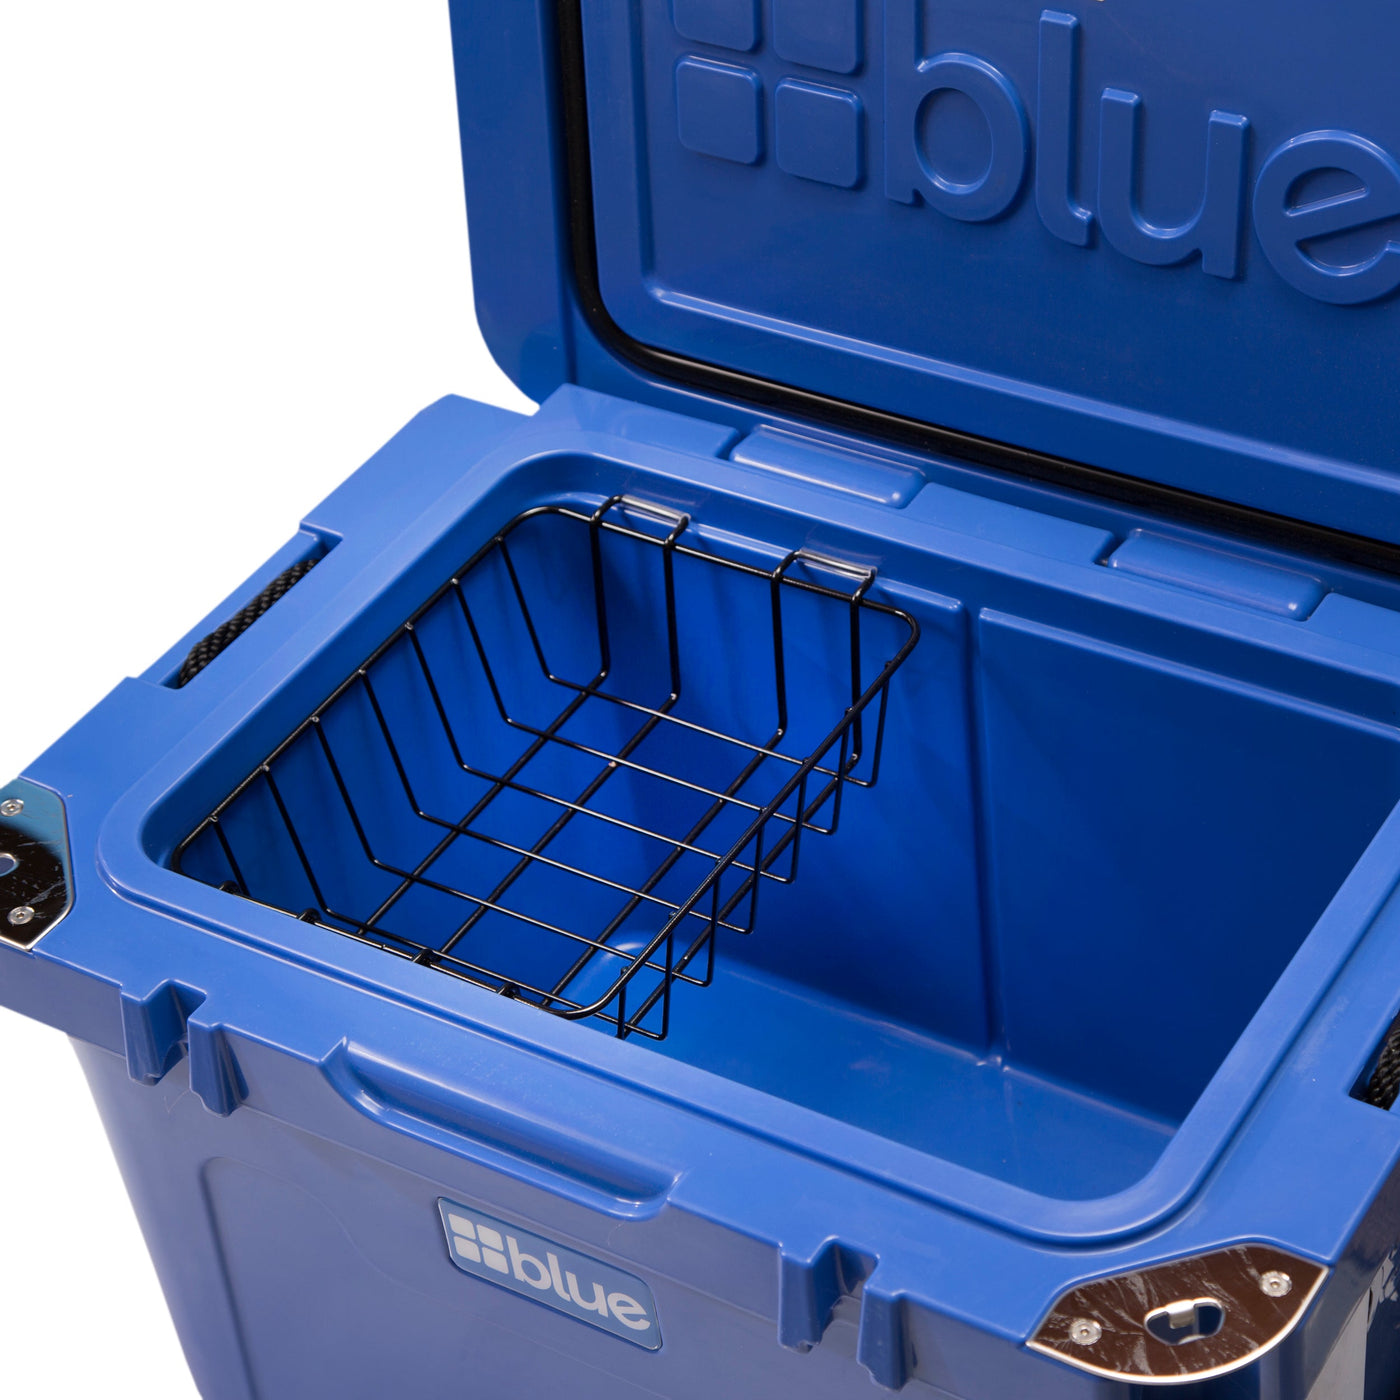 Accessory - Blue Series Blue Cooler Dry Basket by Blue Coolers